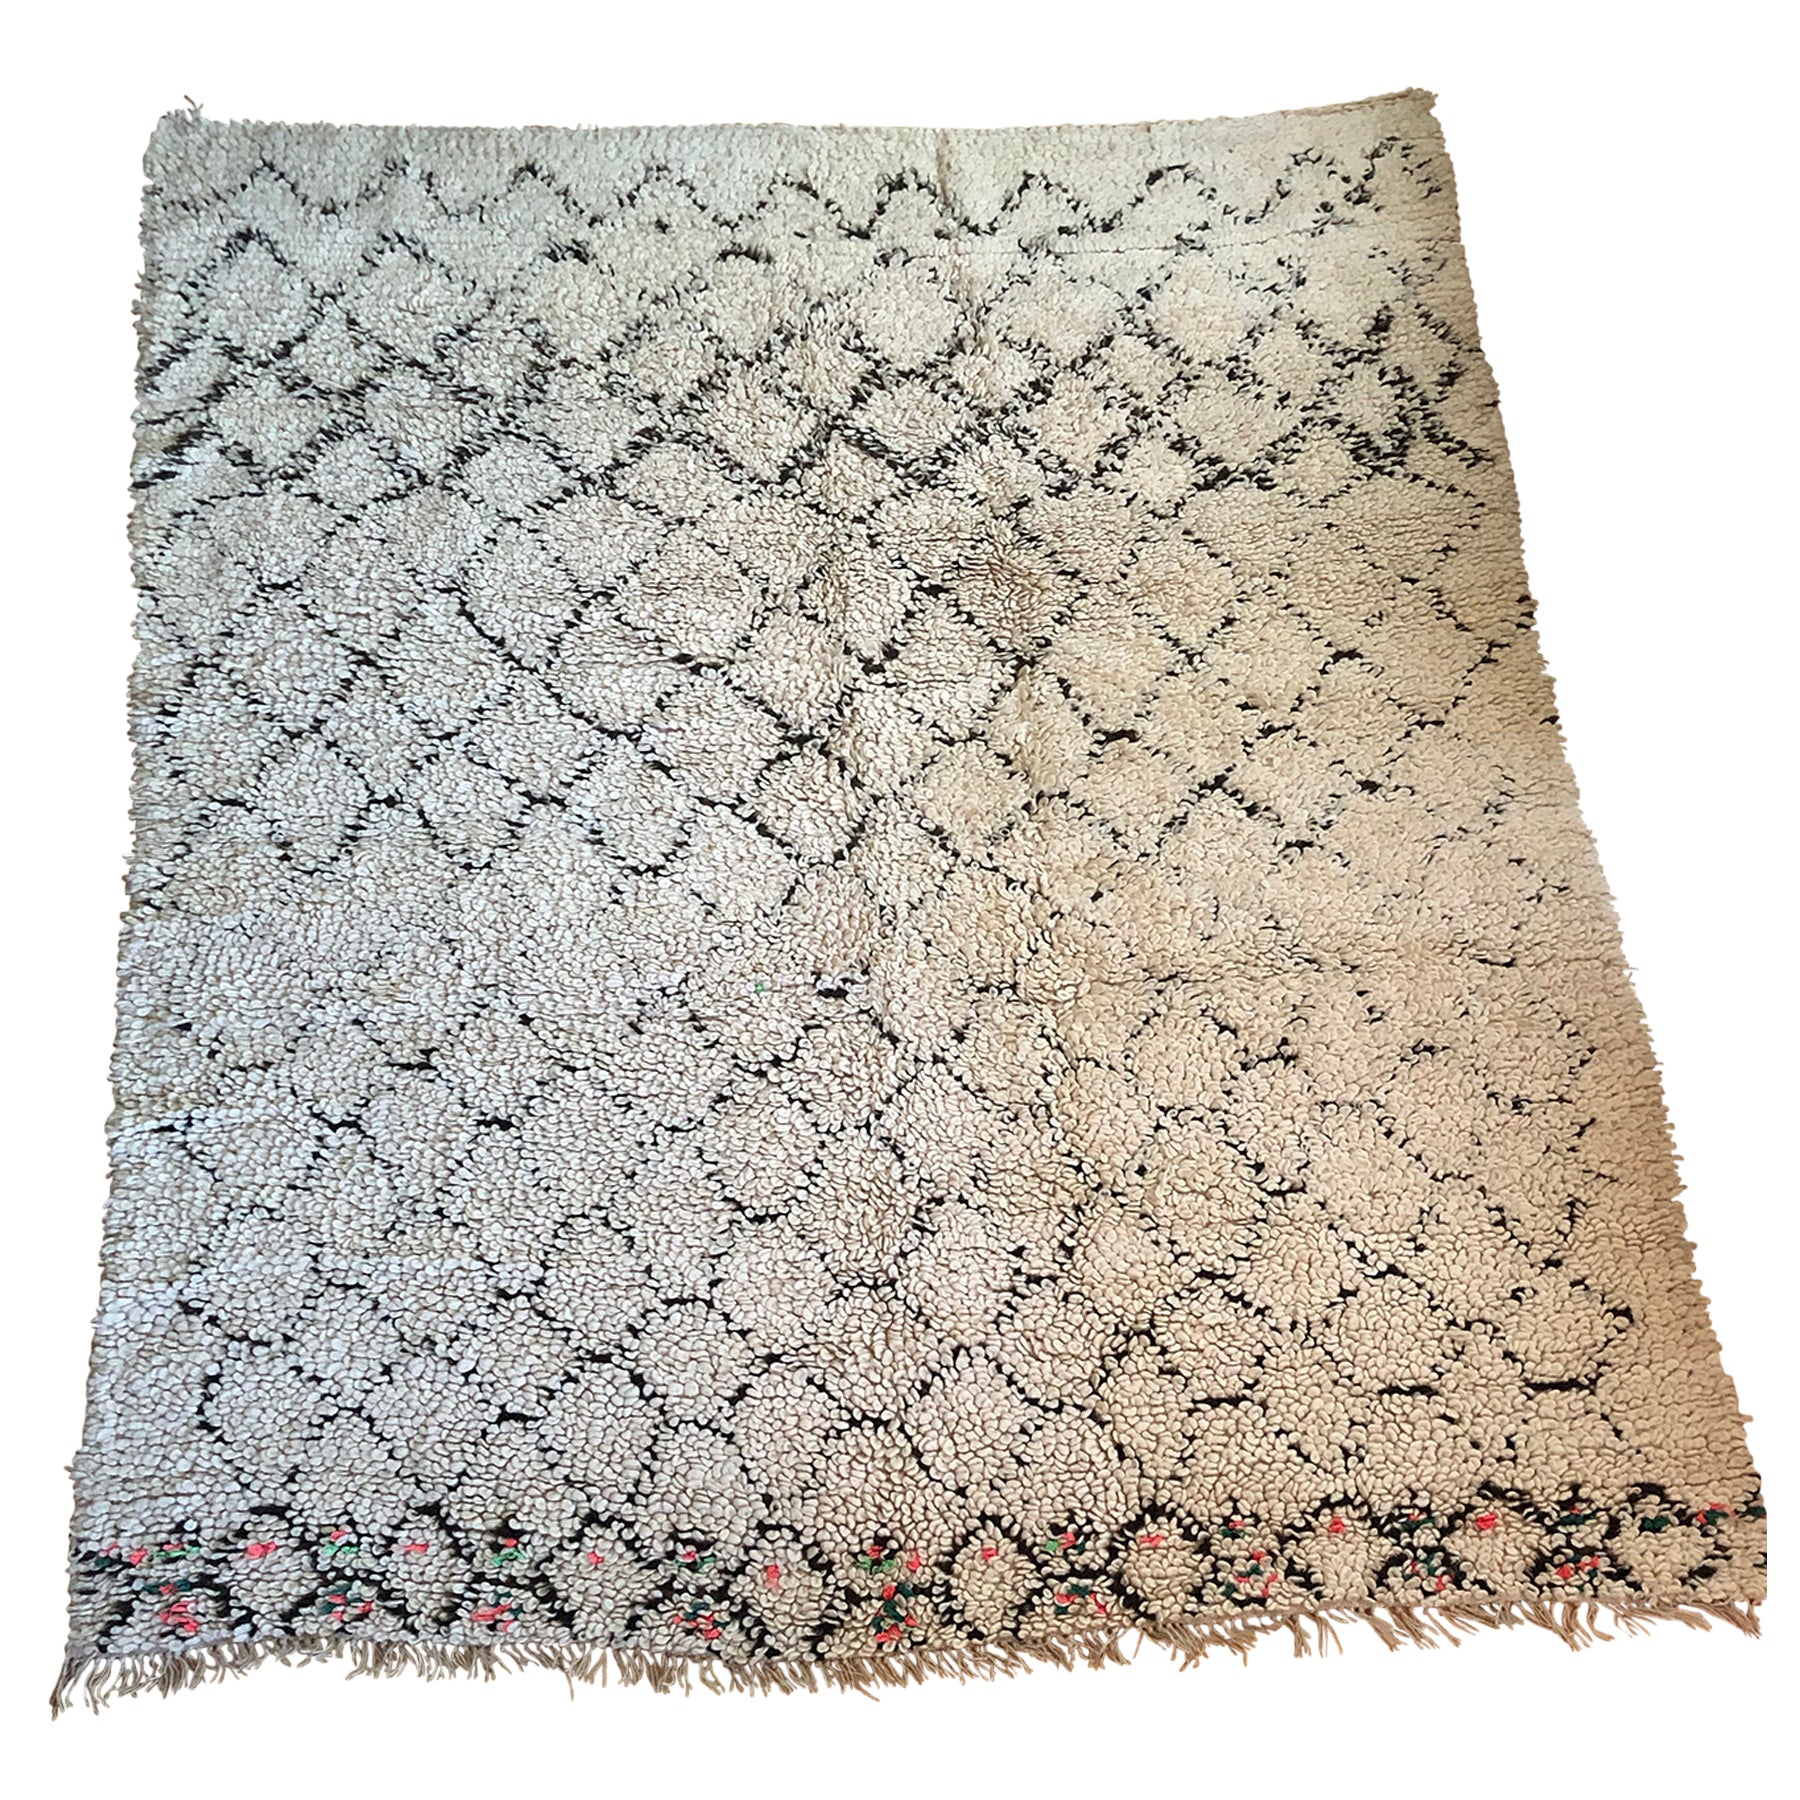 White Moroccan bedside rug with inlaid black diamond pattern - Kantara | Moroccan Rugs